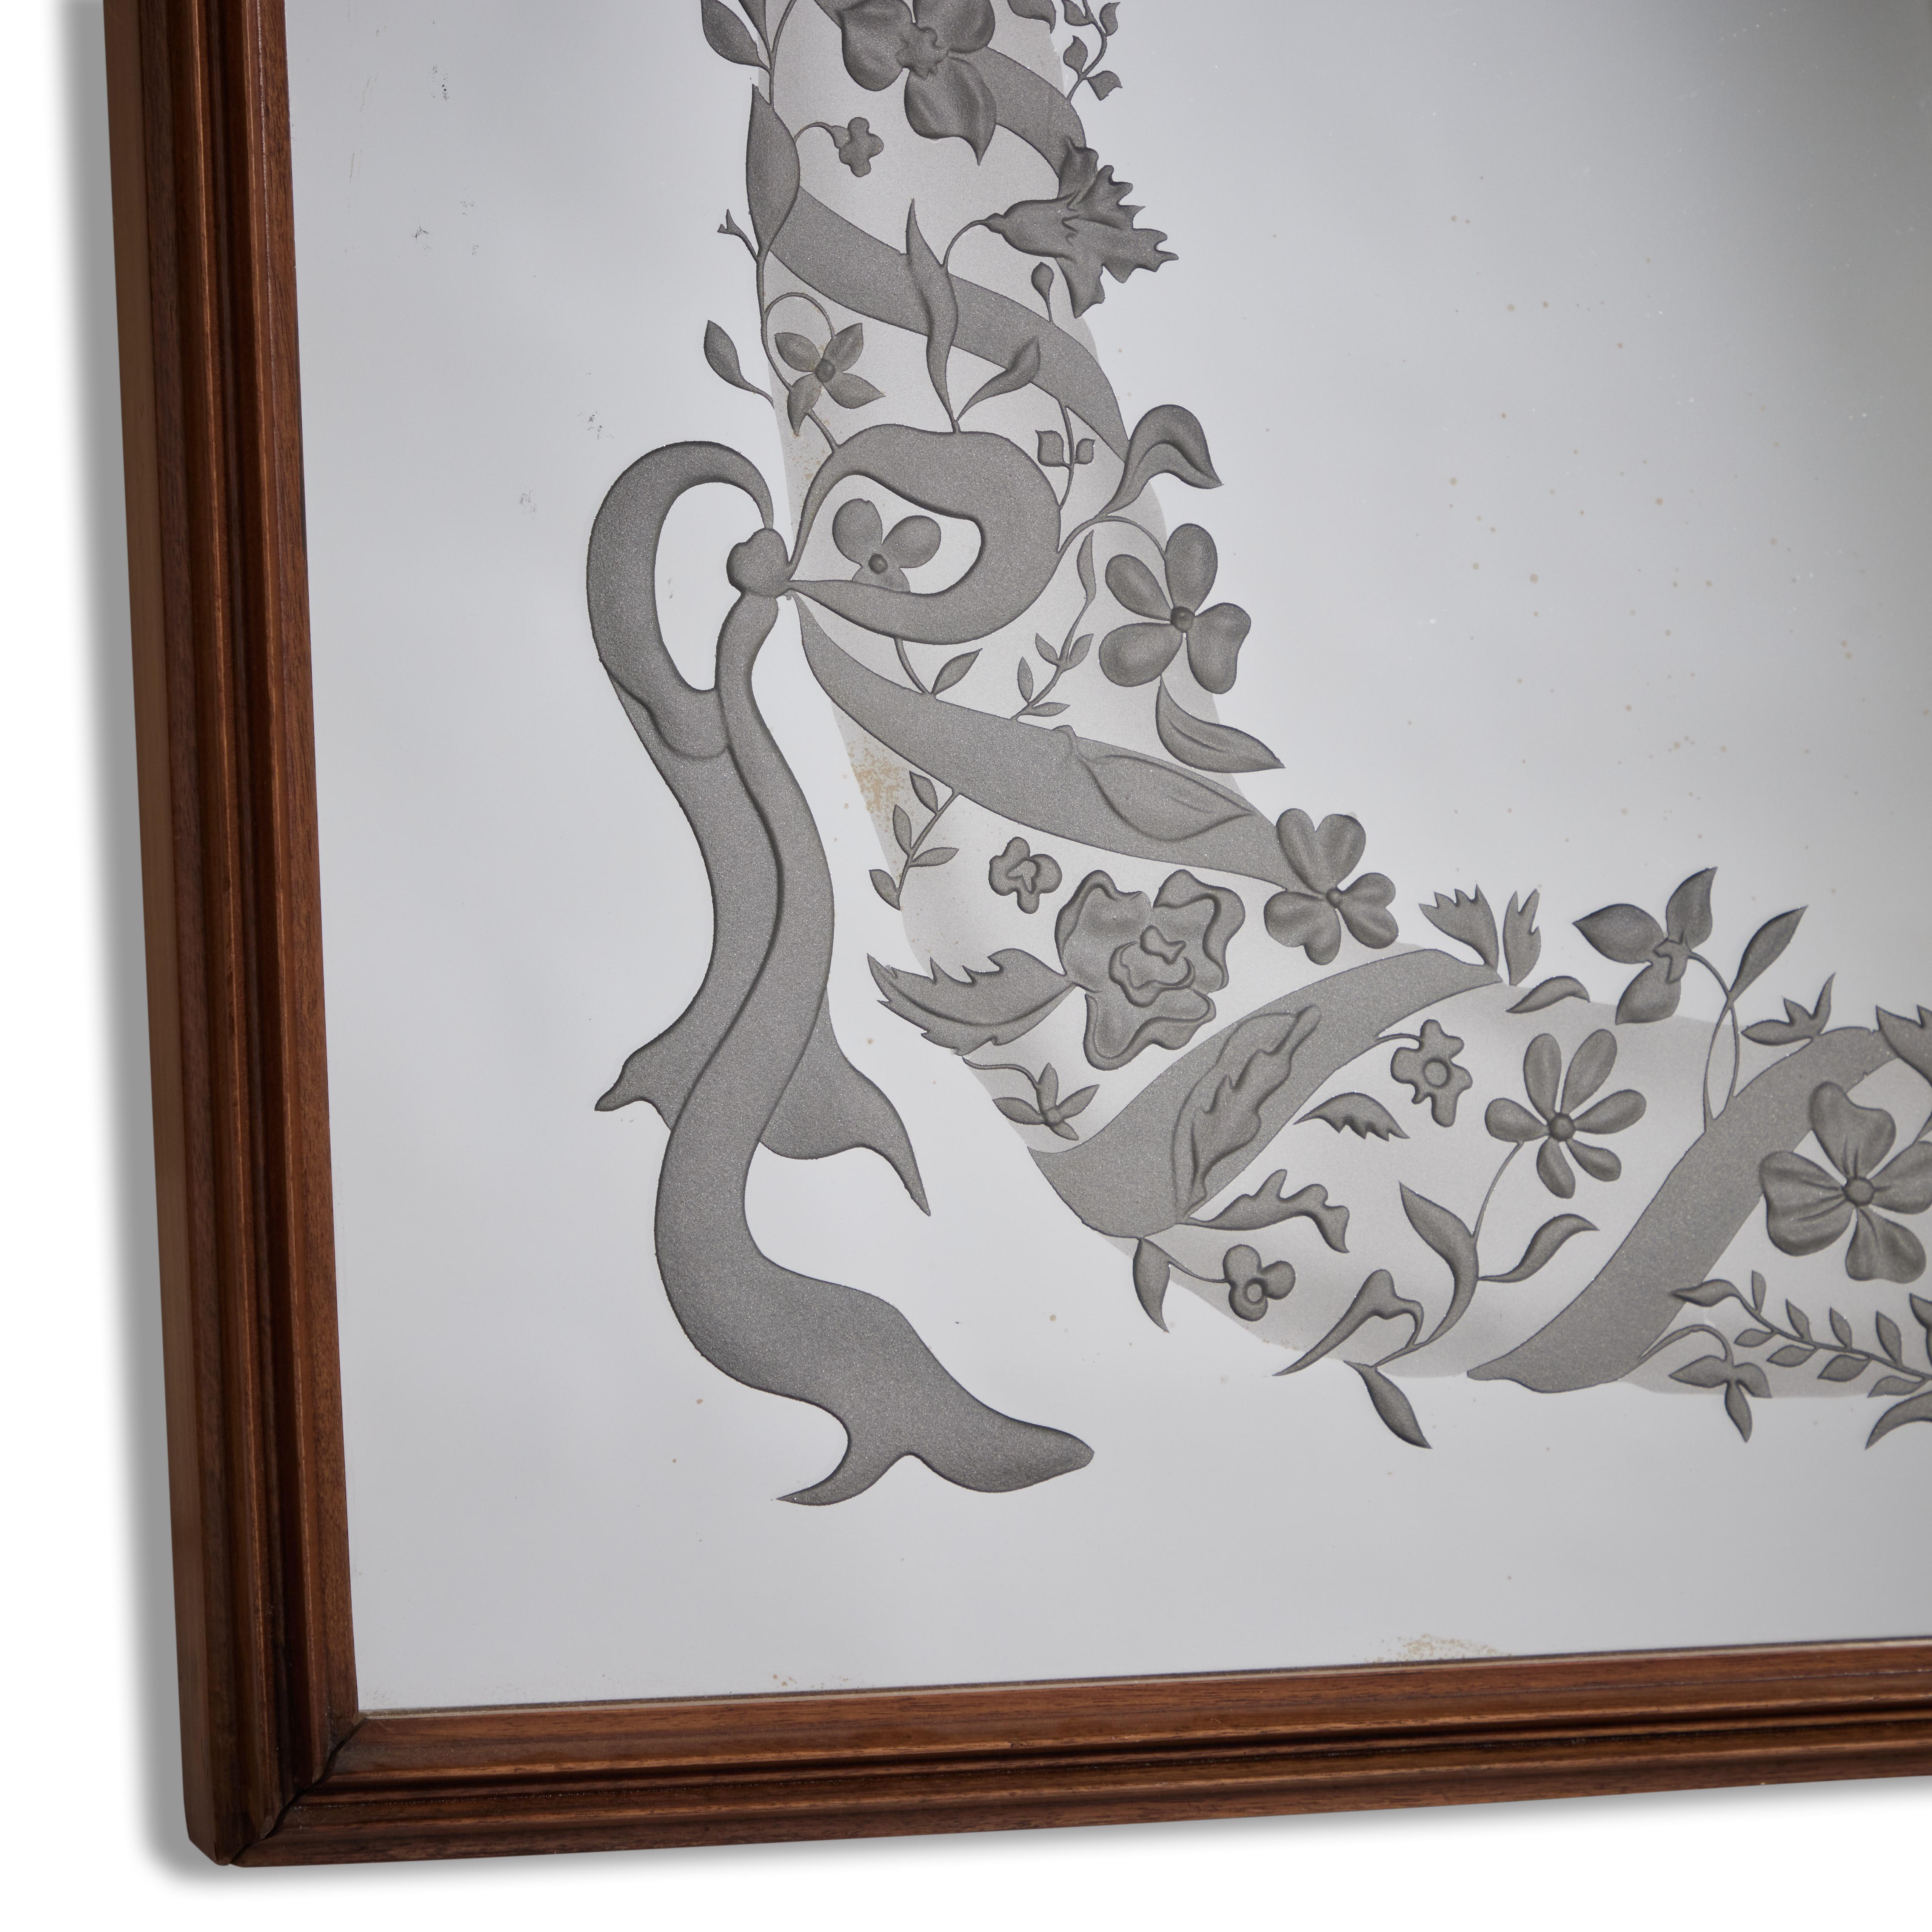 Illuminated mirror by Pietro Chiesa for Fontana Arte with etched glass. Made in Italy circa 1940s.